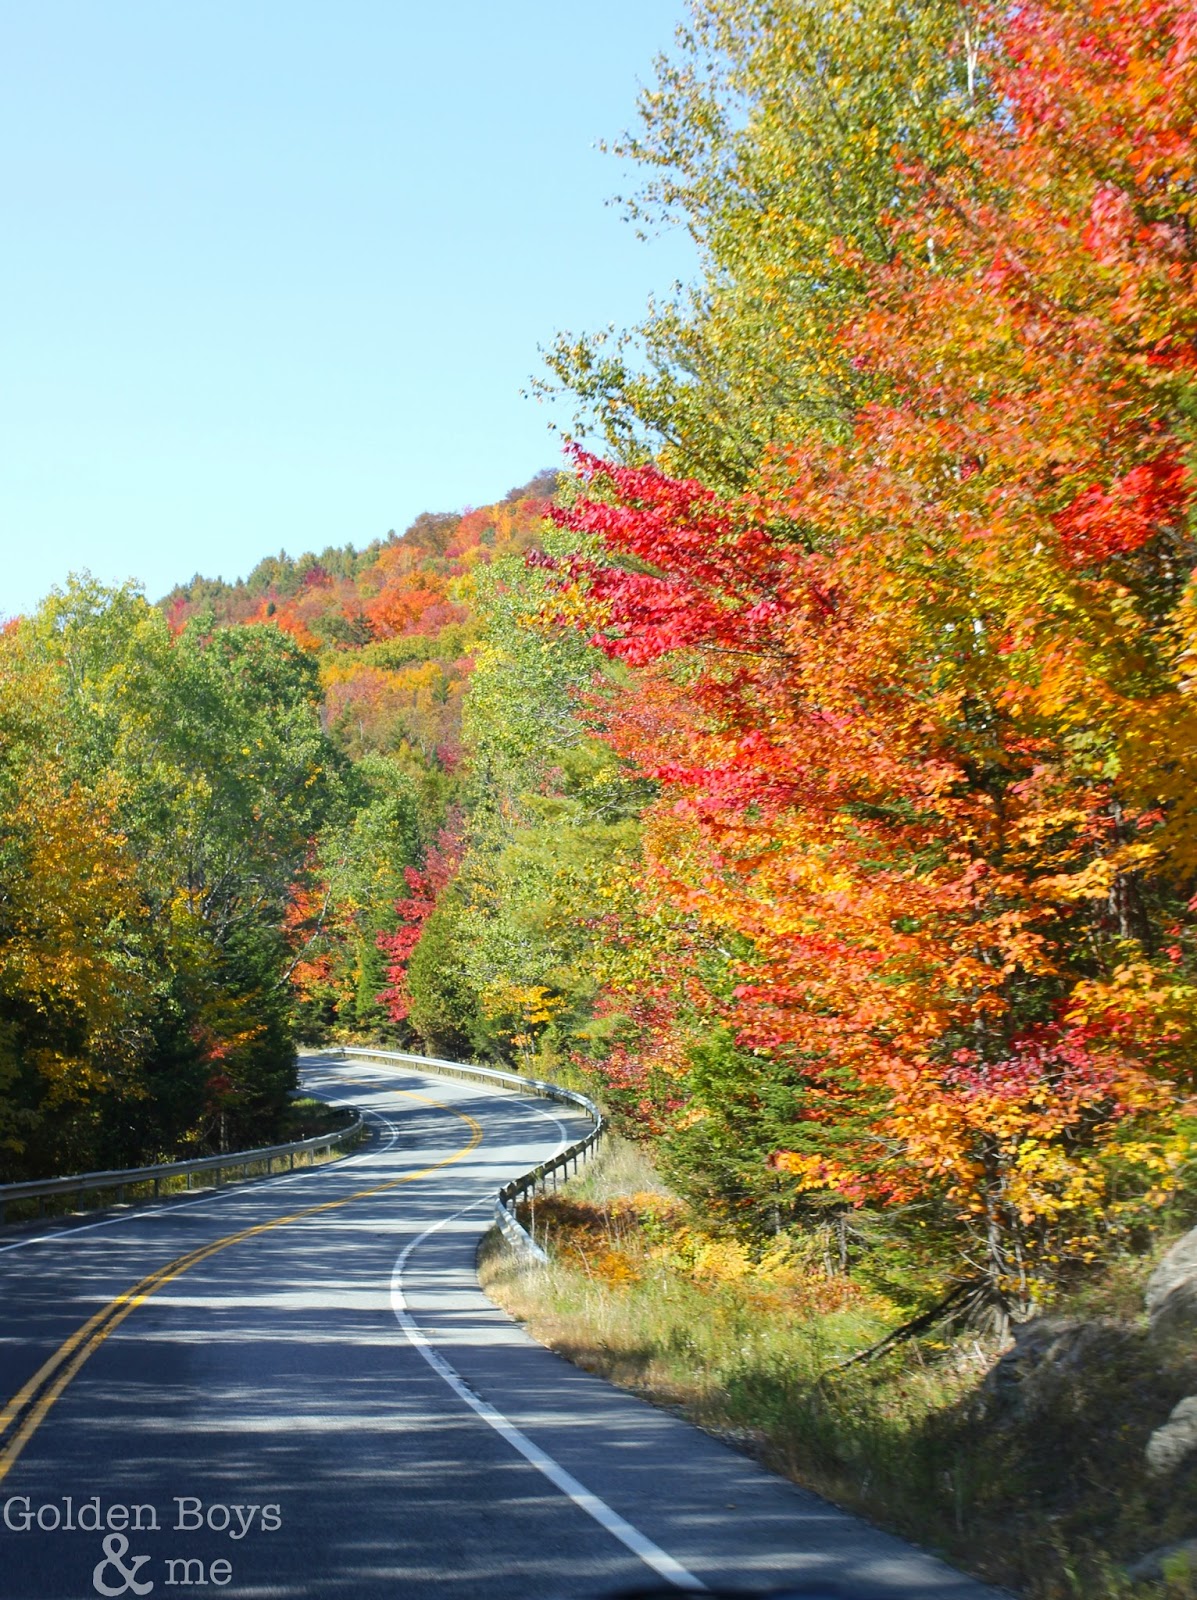 Fall Foliage in the Adirondack Mountains in Upstate, NY. Via www.goldenboysandme,com